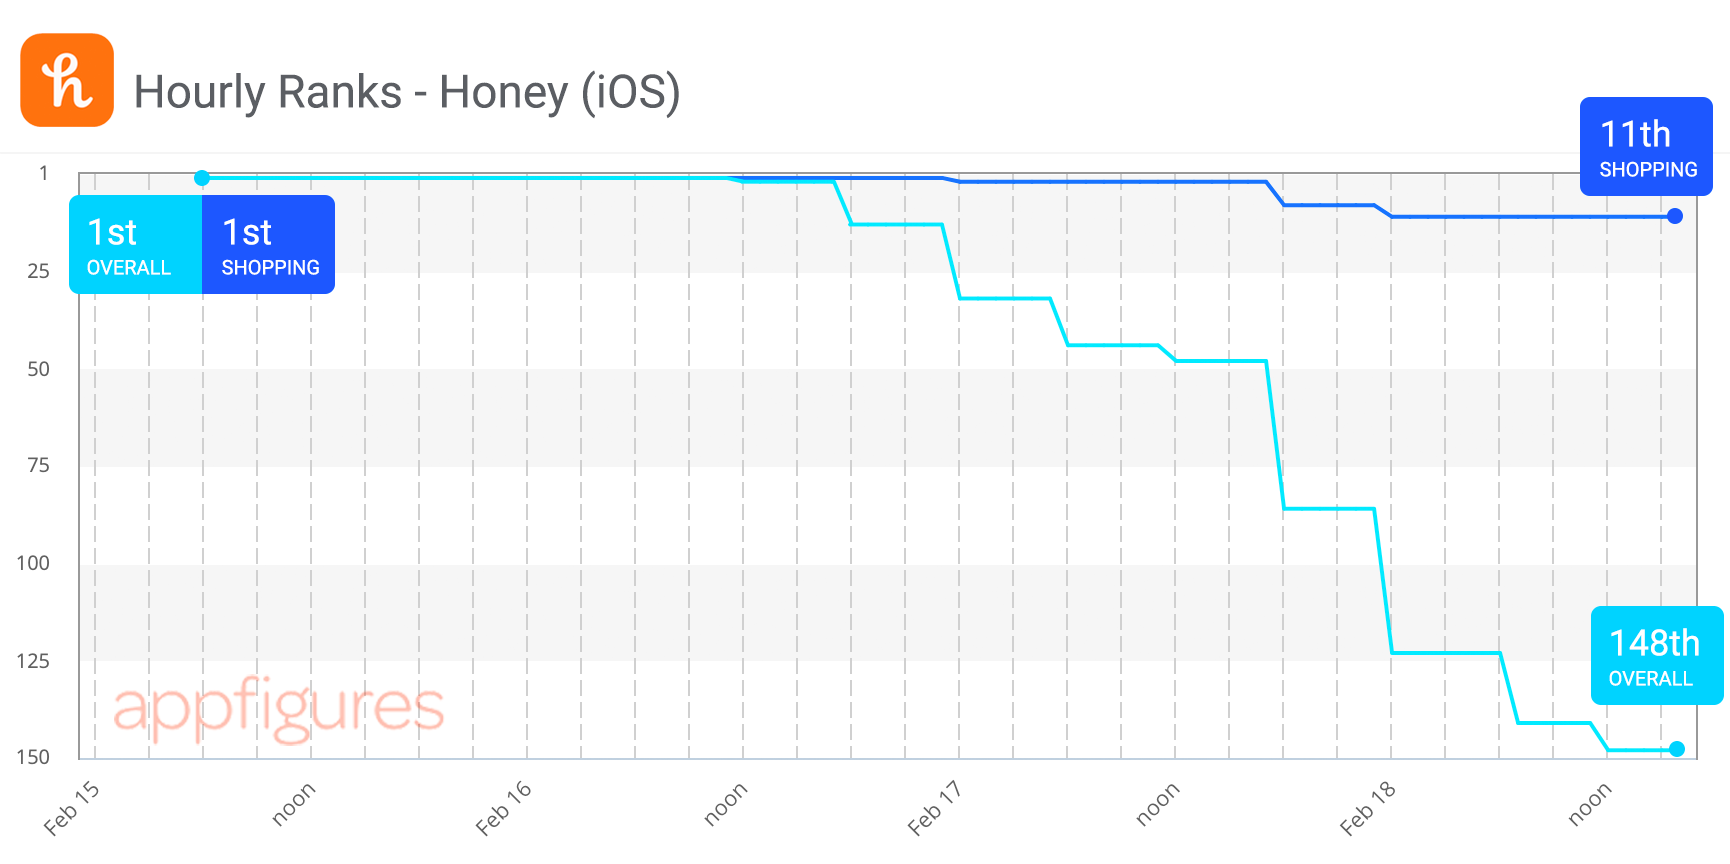 Hourly ranks from the App Store